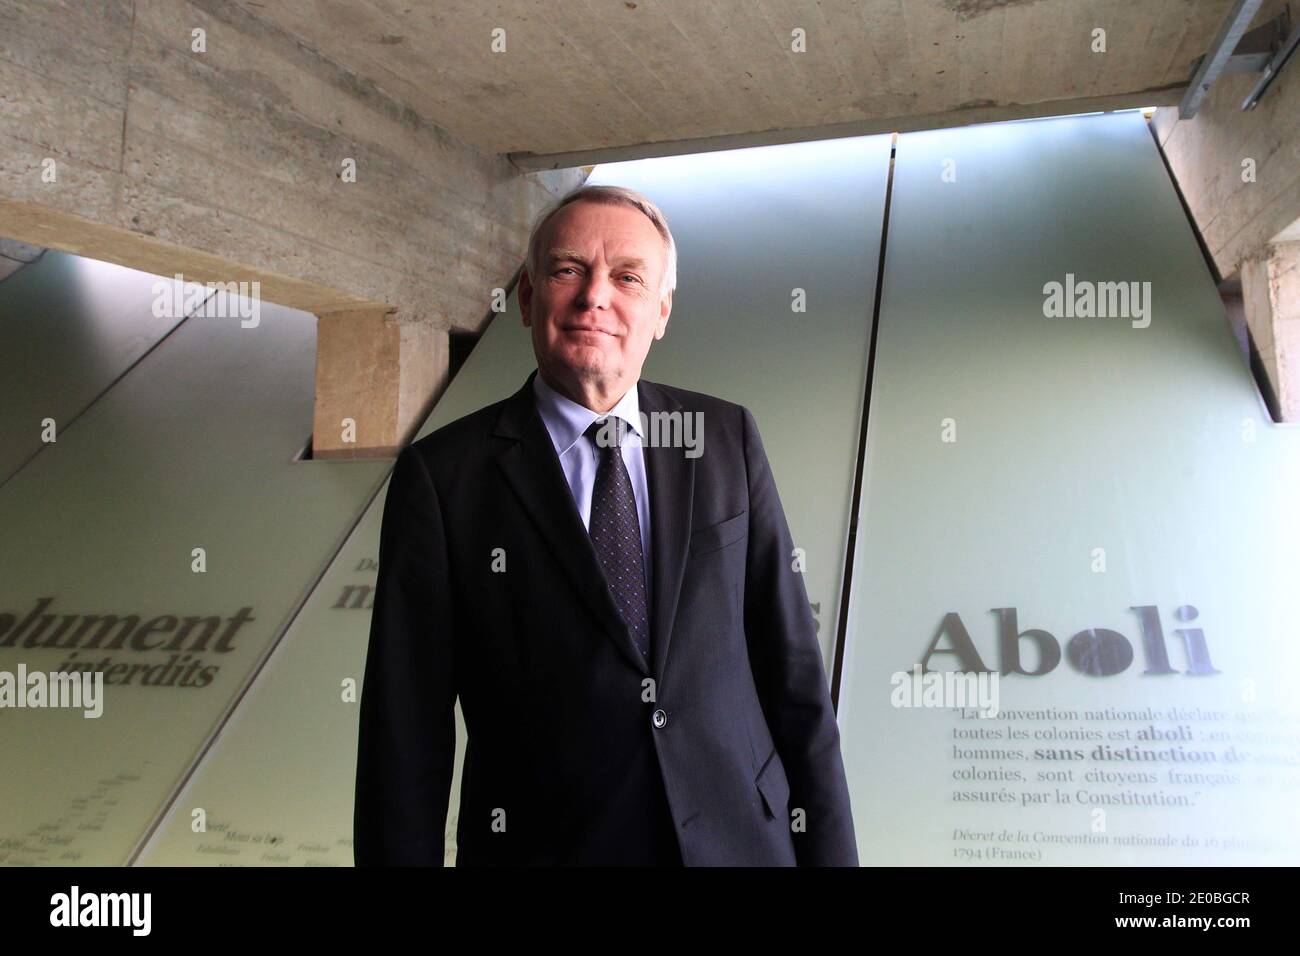 Jean-Marc Ayrault, Mayor of Nantes and MP visits the memorial of the abolition of slavery in Nantes, March 23, 2012. The memorial designed by the artist Krzystof Wodiczko and architect Julian Bonder will open to the public on Sunday. Photo by Laetitia Notarianni/ABACAPRESS.COM Stock Photo